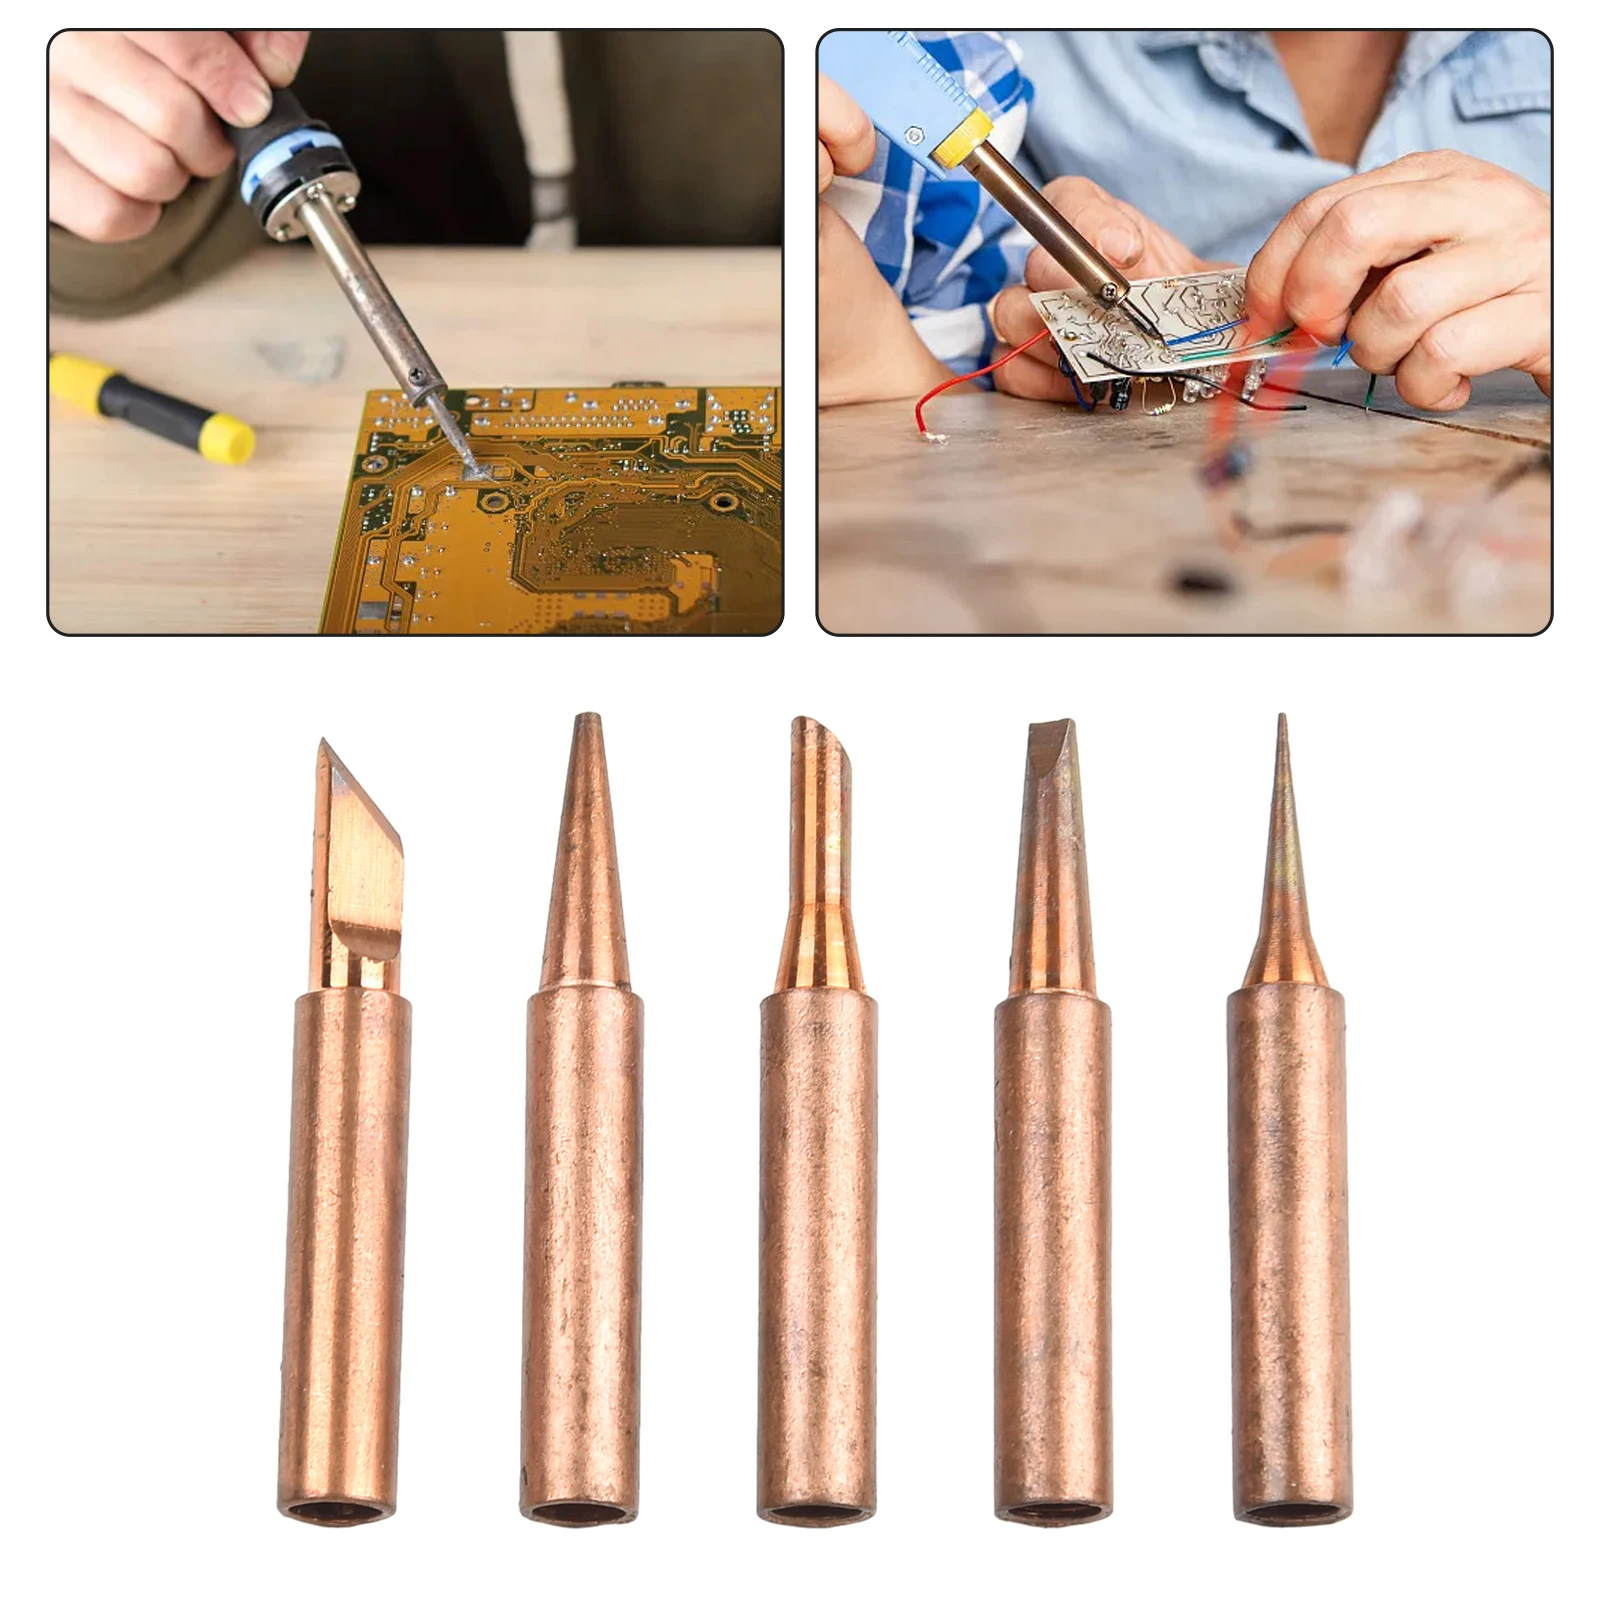 

5Pcs Soldering Iron Tip Professional Bit Copper Iron Tips Sets Soldering Replacement For I+B+K+3C+2.4D Soldering Accessories